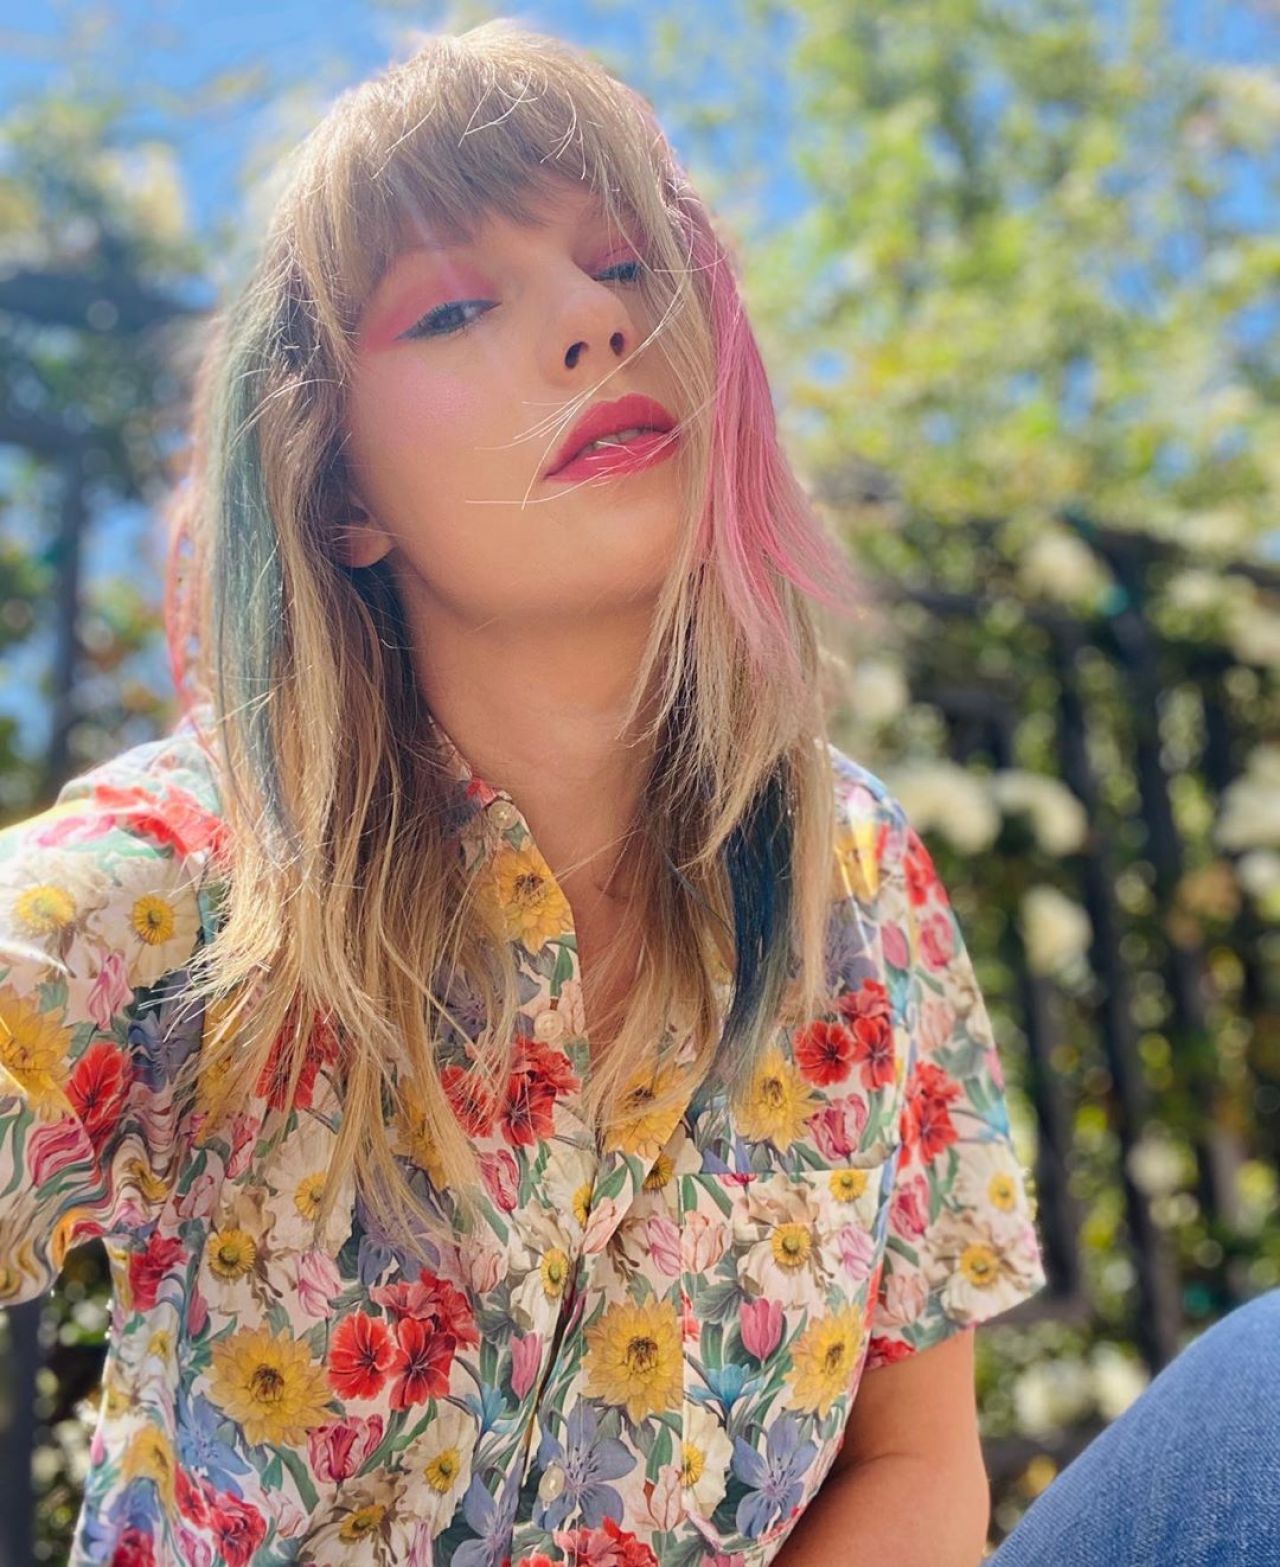 Taylor Swift In R13 Skater Shirt @ Instagram Pic May 17, 2020